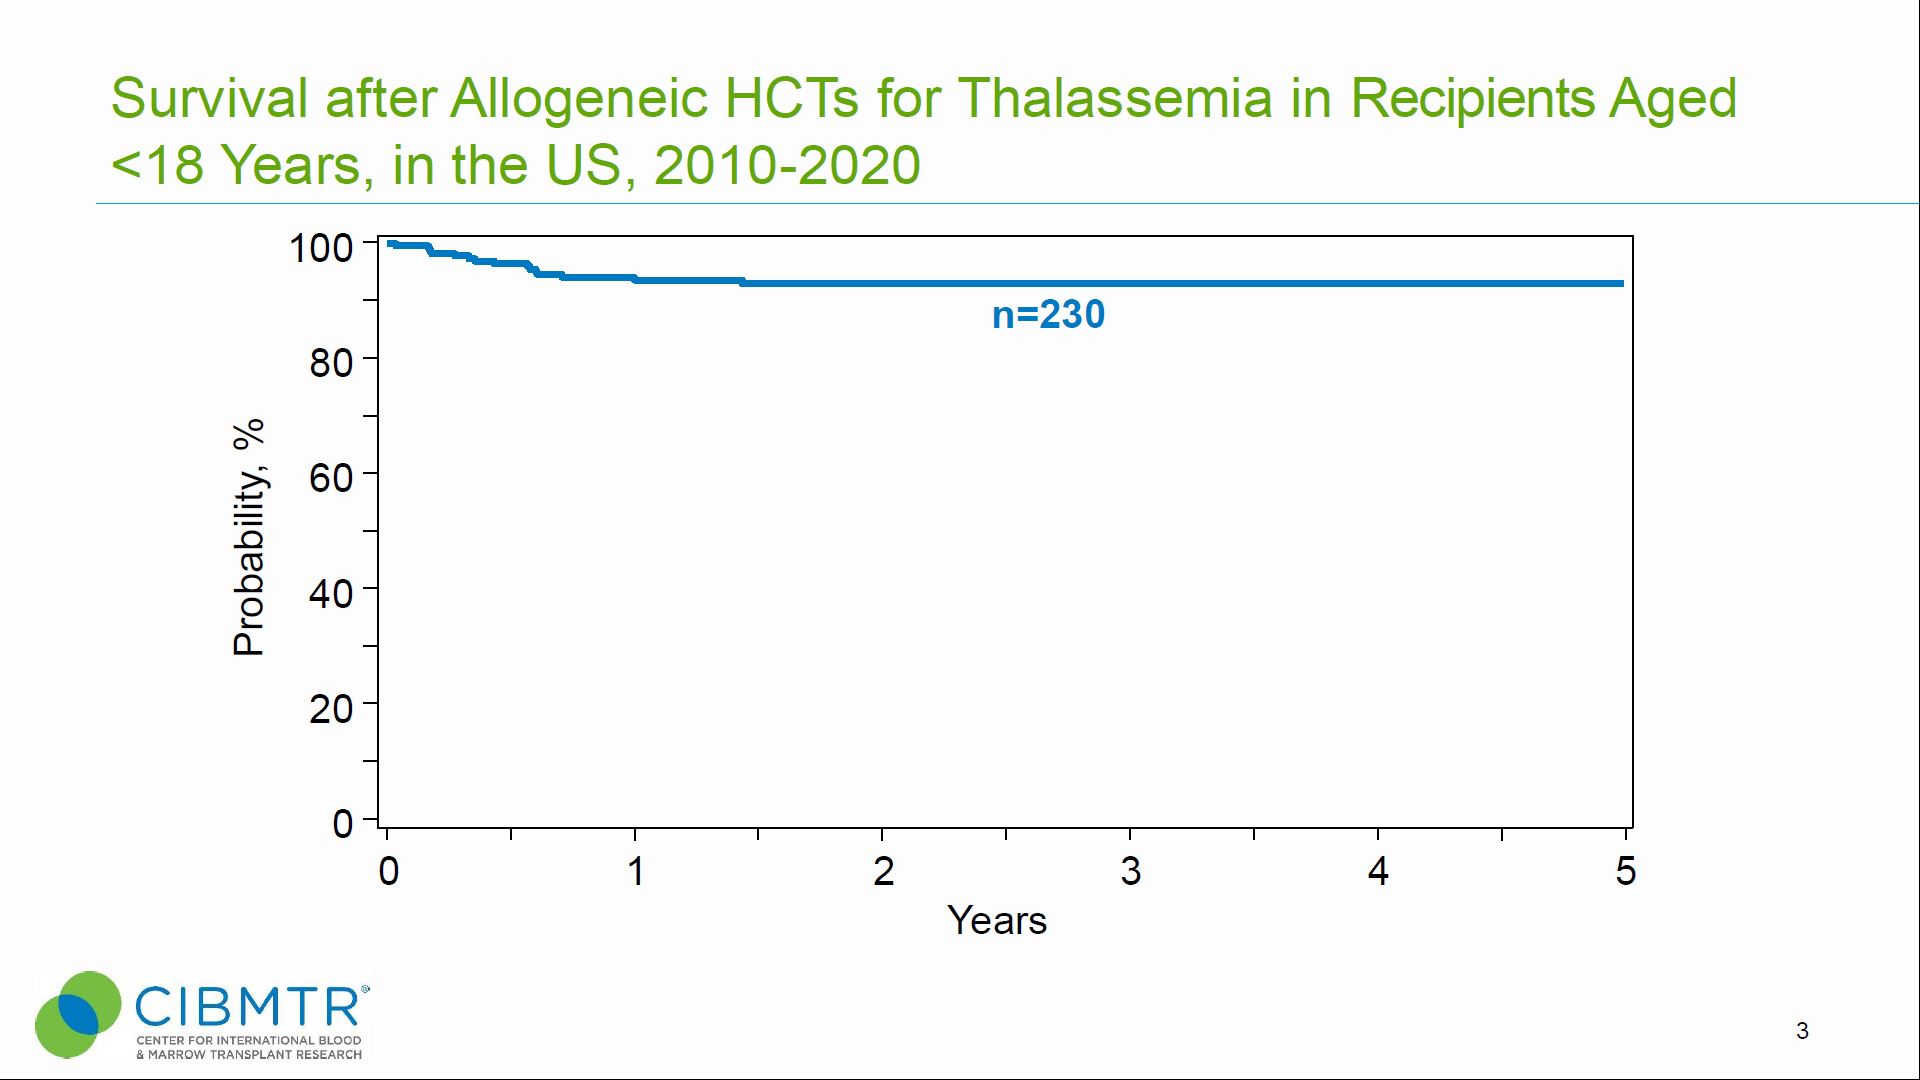 FIgure 1 Survival after Allogeneic HCTs for Thalassemia in Recipients Aged Under 18